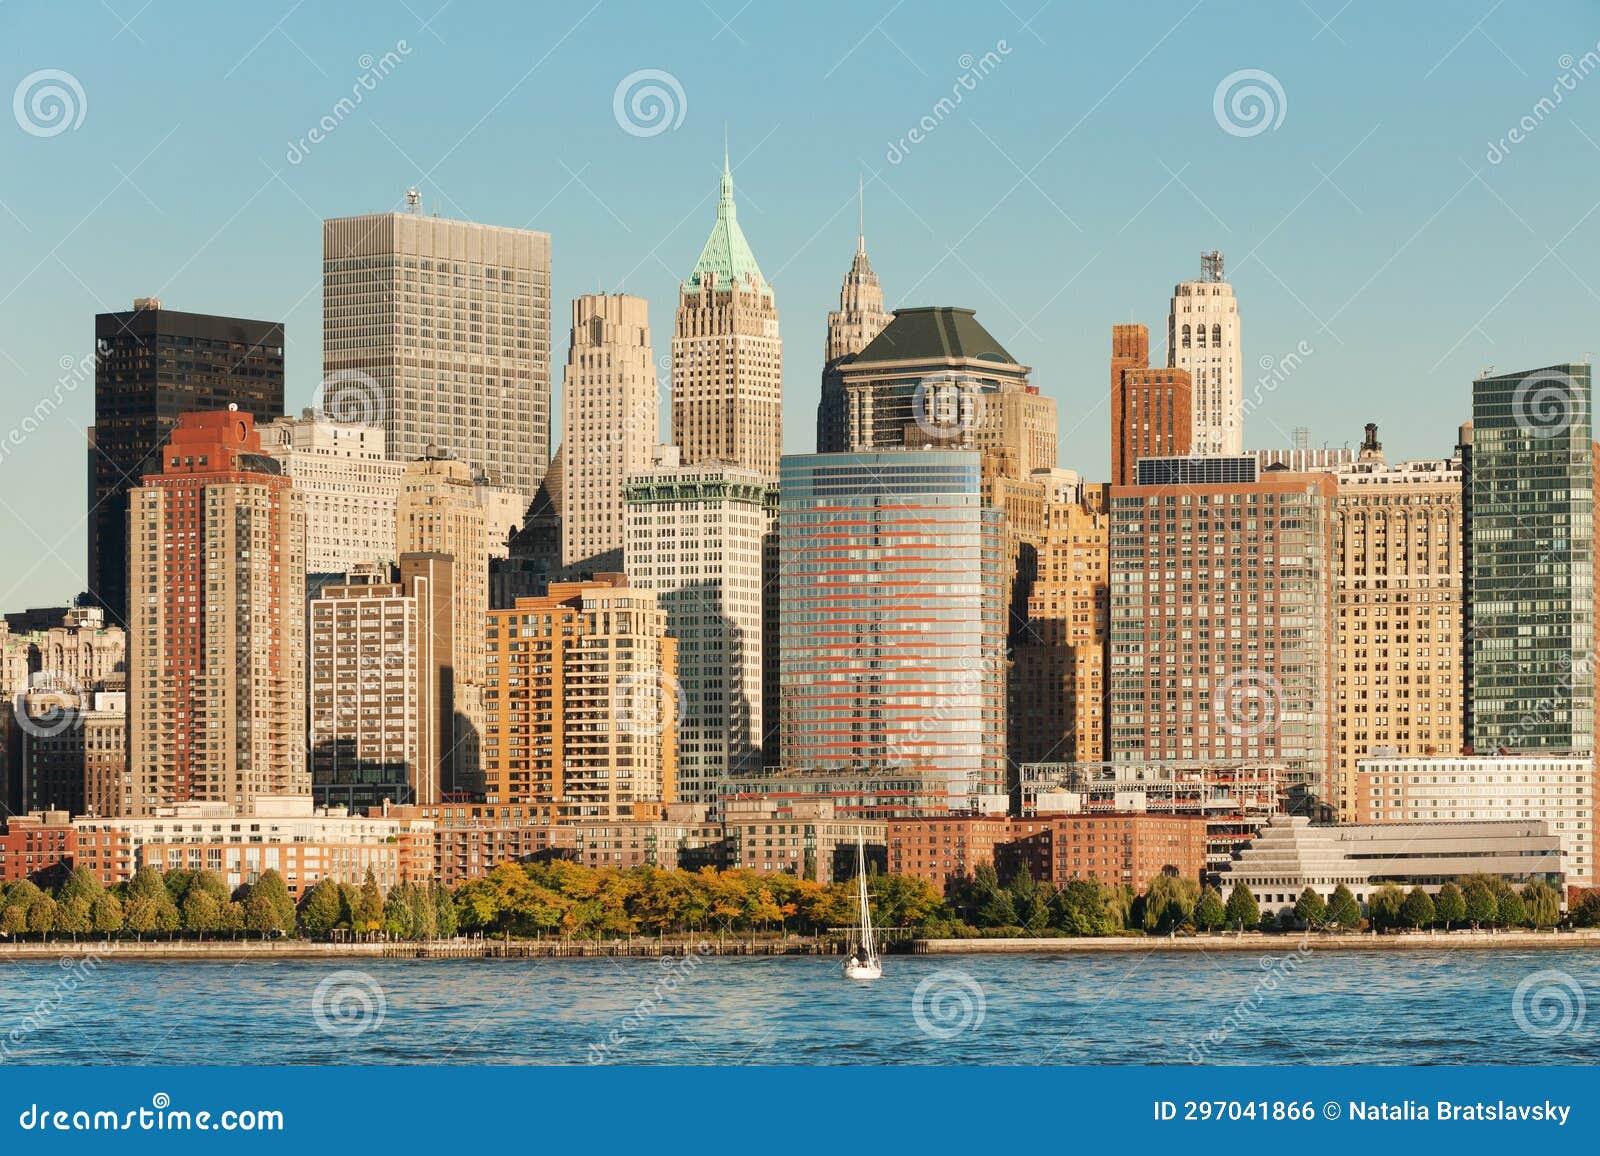 lower manhattan west side and financial district highrises